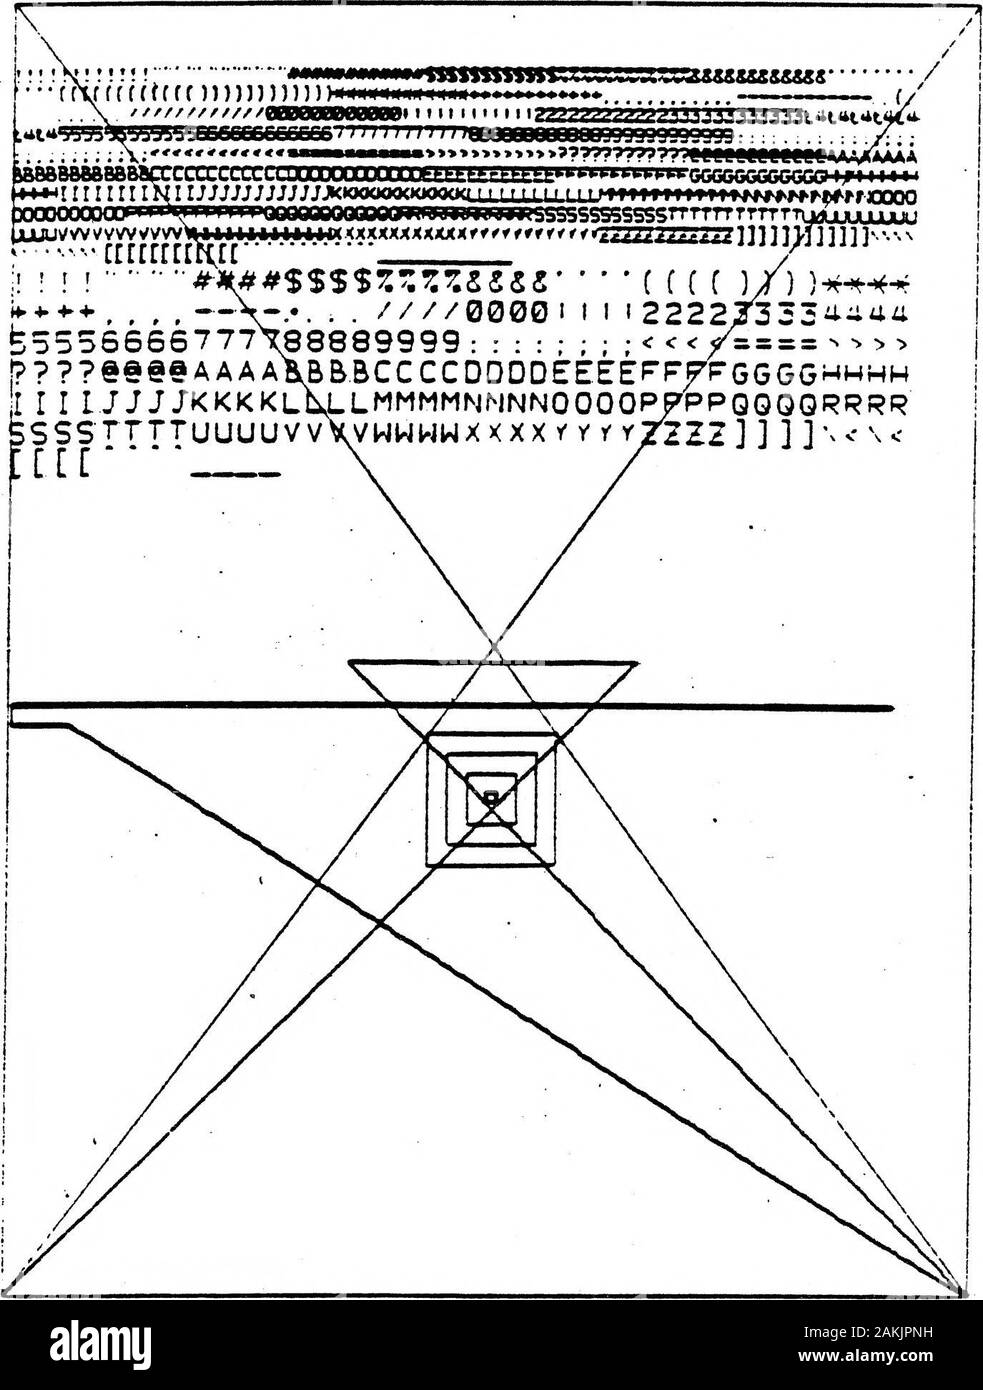 sandersAssociates :: graphic7 :: GA-77-274 Rev F Graphic 7 Acceptance Test Procedure May1981 . Figure 4-16. Format B SIZE A CODE I DENT NO. 94117 SCALE * DWG NO. 1088690 J ,.u SHEET 92 OF 107 OP—909 REV—A REVISIONS LTR DESCRIPTION DATE APPROVED. &lt; Figure 4-17. Format C SIZE CODE I DENT NO. 94117 SCALE i DWG NO. 1088690 SHEET 93 OF 107 OP—909 REV-* OP—909 REV—A REVISIONS LTR DESCRIPTION DATE Stock Photo